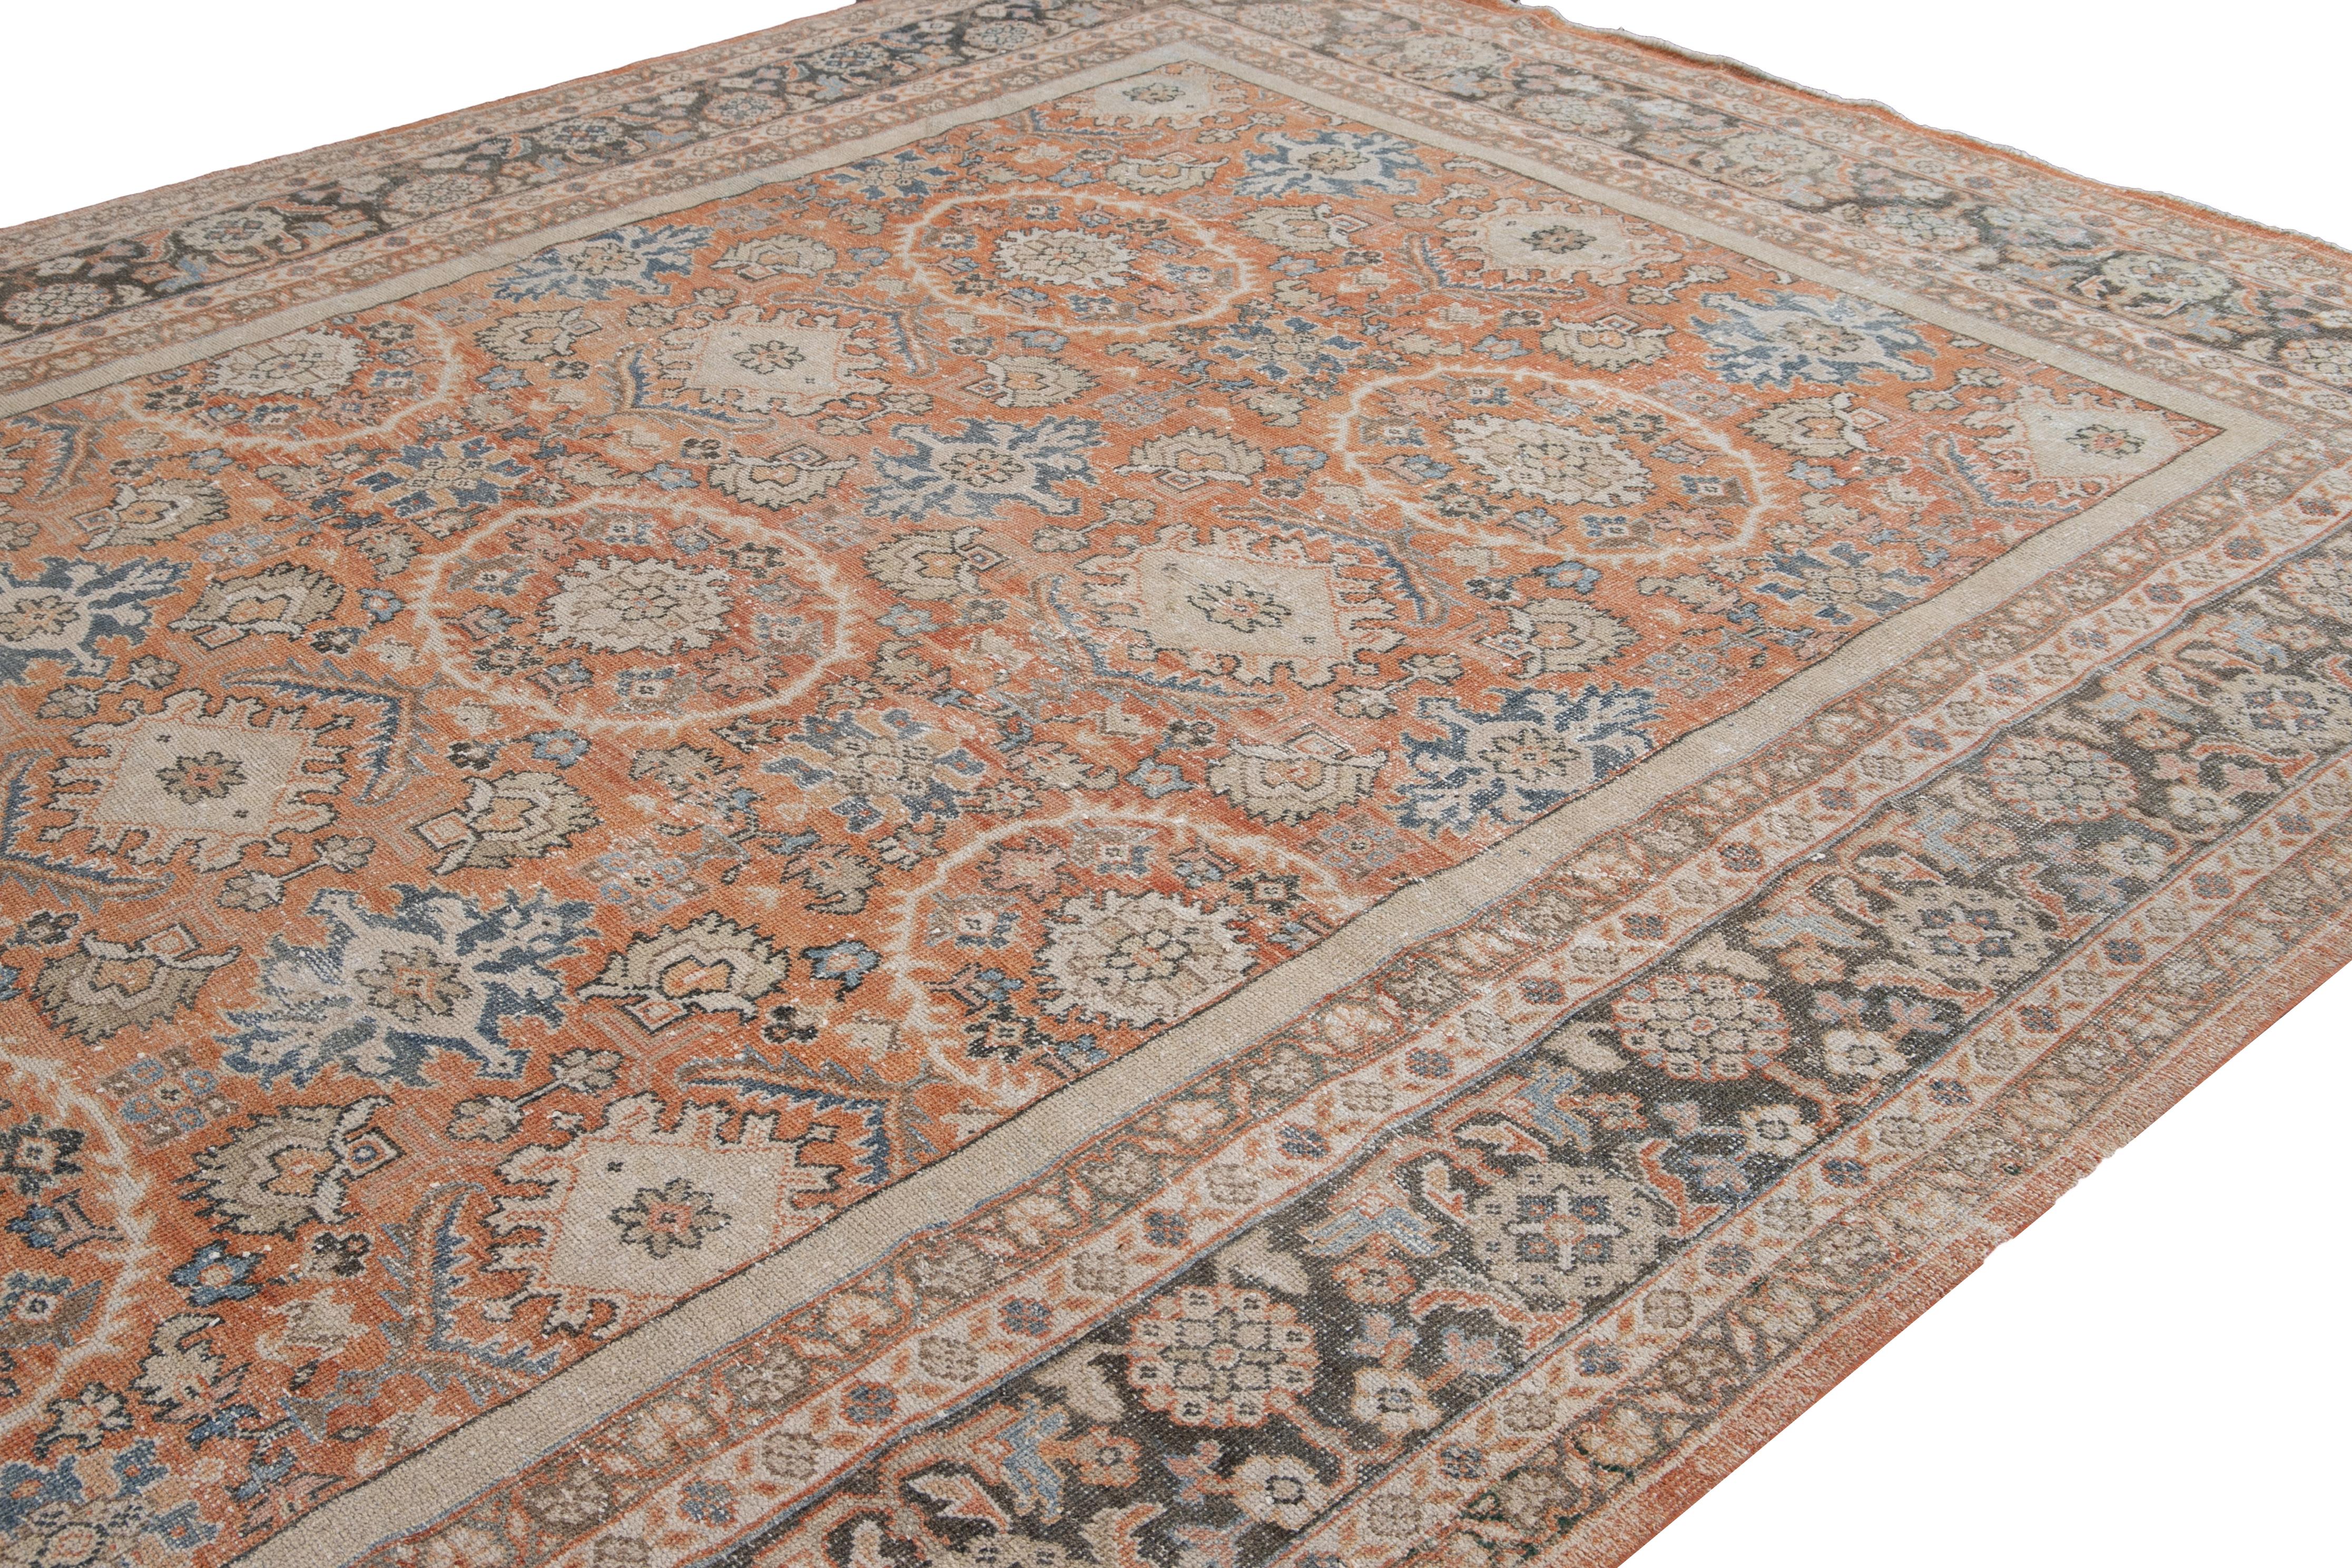 Antique Mahal Handmade Shabby Chic Wool Rug In Distressed Condition For Sale In Norwalk, CT